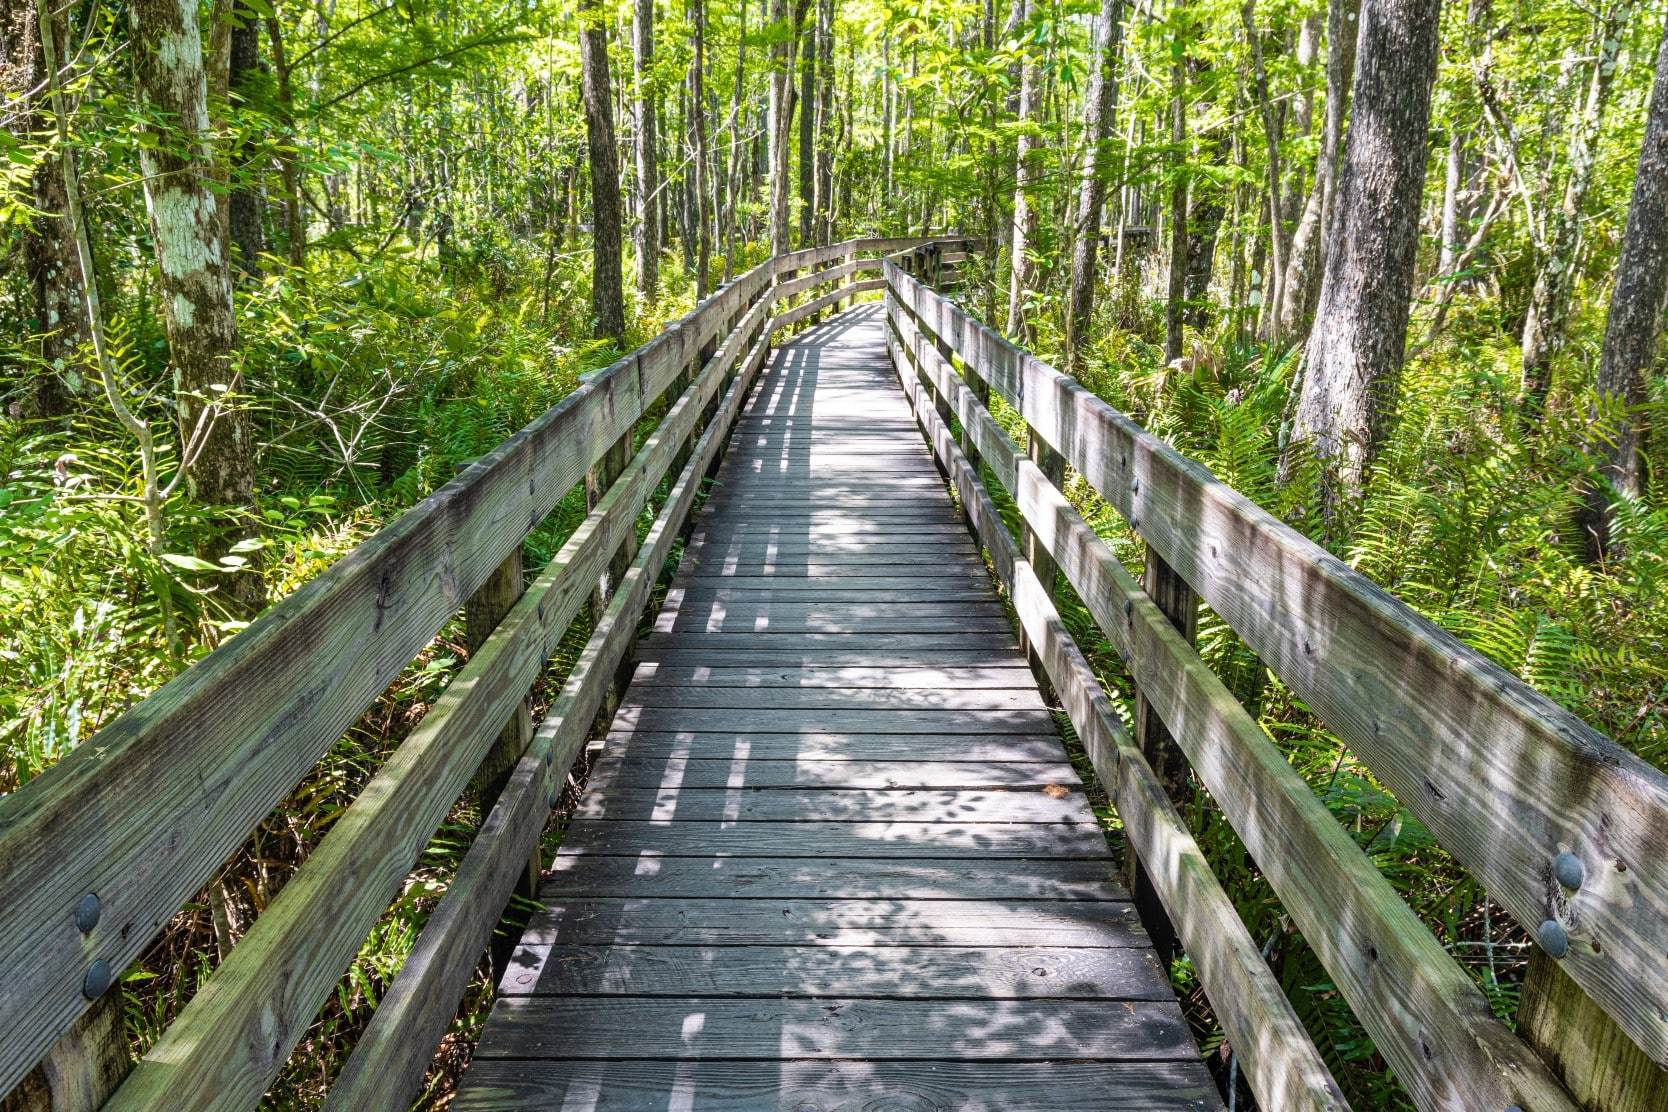 Wooden boardwalk through the forest on a Florida hiking trail